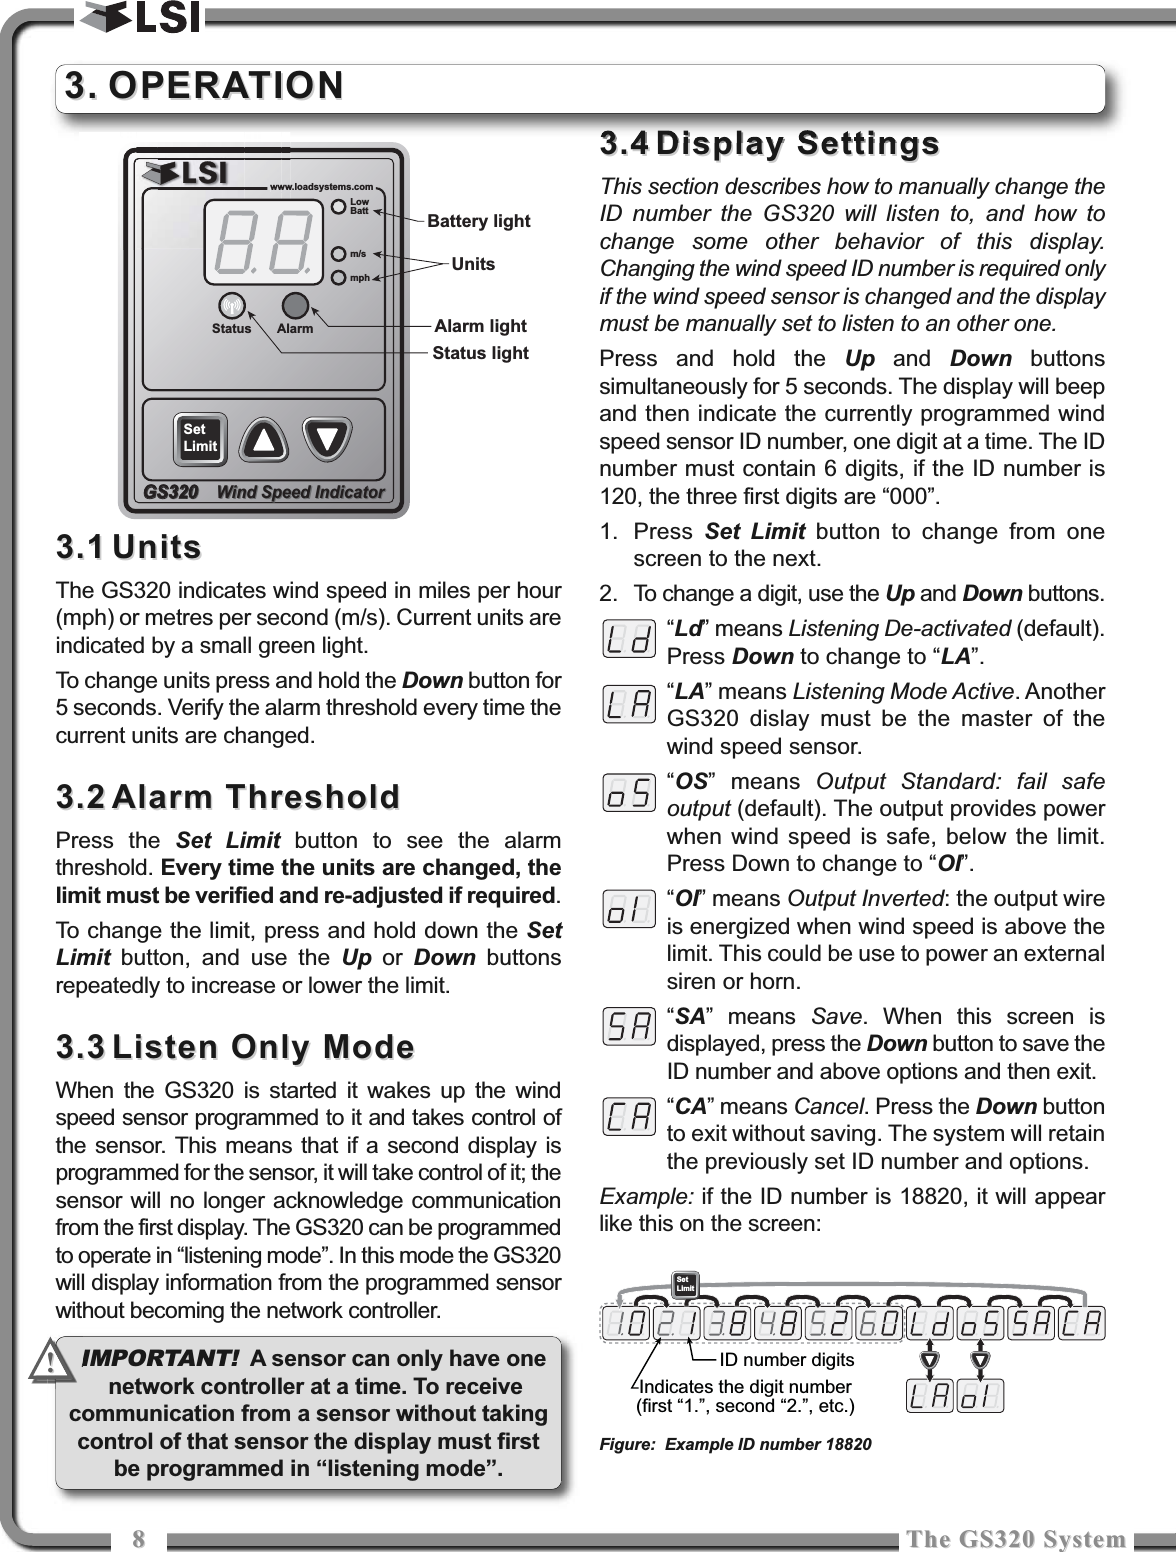 88The GS320 SystemThe GS320 System3.13.1 UnitsUnitsThe GS320 indicates wind speed in miles per hour(mph) or metres per second (m/s). Current units areindicated by a small green light.To change units press and hold the Down button for5 seconds. Verify the alarm threshold every time thecurrent units are changed.3.23.2 Alarm ThresholdAlarm ThresholdPress the Set Limit button to see the alarmthreshold. Every time the units are changed, thelimit must be verified and re-adjusted if required. To change the limit, press and hold down the SetLimit button, and use the Up or  Down buttonsrepeatedly to increase or lower the limit.3.33.3 Listen Only ModeListen Only ModeWhen the GS320 is started it wakes up the windspeed sensor programmed to it and takes control ofthe sensor. This means that if a second display isprogrammed for the sensor, it will take control of it; thesensor will no longer acknowledge communicationfrom the first display. The GS320 can be programmedto operate in “listening mode”. In this mode the GS320will display information from the programmed sensorwithout becoming the network controller.3.43.4 Display Settings Display Settings This section describes how to manually change theID number the GS320 will listen to, and how tochange some other behavior of this display.Changing the wind speed ID number is required onlyif the wind speed sensor is changed and the displaymust be manually set to listen to an other one.Press and hold the Up and  Down buttonssimultaneously for 5 seconds. The display will beepand then indicate the currently programmed windspeed sensor ID number, one digit at a time. The IDnumber must contain 6 digits, if the ID number is120, the three first digits are “000”.1. Press  Set Limit button to change from onescreen to the next. 2. To change a digit, use the Up and Down buttons.“Ld” means Listening De-activated (default).Press Down to change to “LA”.“LA” means Listening Mode Active. AnotherGS320 dislay must be the master of thewind speed sensor.“OS” means Output Standard: fail safeoutput (default). The output provides powerwhen wind speed is safe, below the limit.Press Down to change to “OI”.“OI” means Output Inverted: the output wireis energized when wind speed is above thelimit. This could be use to power an externalsiren or horn.“SA” means Save. When this screen isdisplayed, press the Down button to save theID number and above options and then exit.“CA” means Cancel. Press the Down buttonto exit without saving. The system will retainthe previously set ID number and options.Example: if the ID number is 18820, it will appearlike this on the screen:3.3. OPERATIONOPERATIONwww.loadsystems.comwwwwGS320Wind Speed IndicatorGS320GS320Wind Speed Indicatormphm/sStatus AlarmLowBattSetLimitUnitsBattery lightAlarm lightStatus lightSetLimitIndicates the digit number(first “1.”, second “2.”, etc.)ID number digitsFigure: Example ID number 18820IMPORTANT! A sensor can only have onenetwork controller at a time. To receivecommunication from a sensor without takingcontrol of that sensor the display must firstbe programmed in “listening mode”.!!